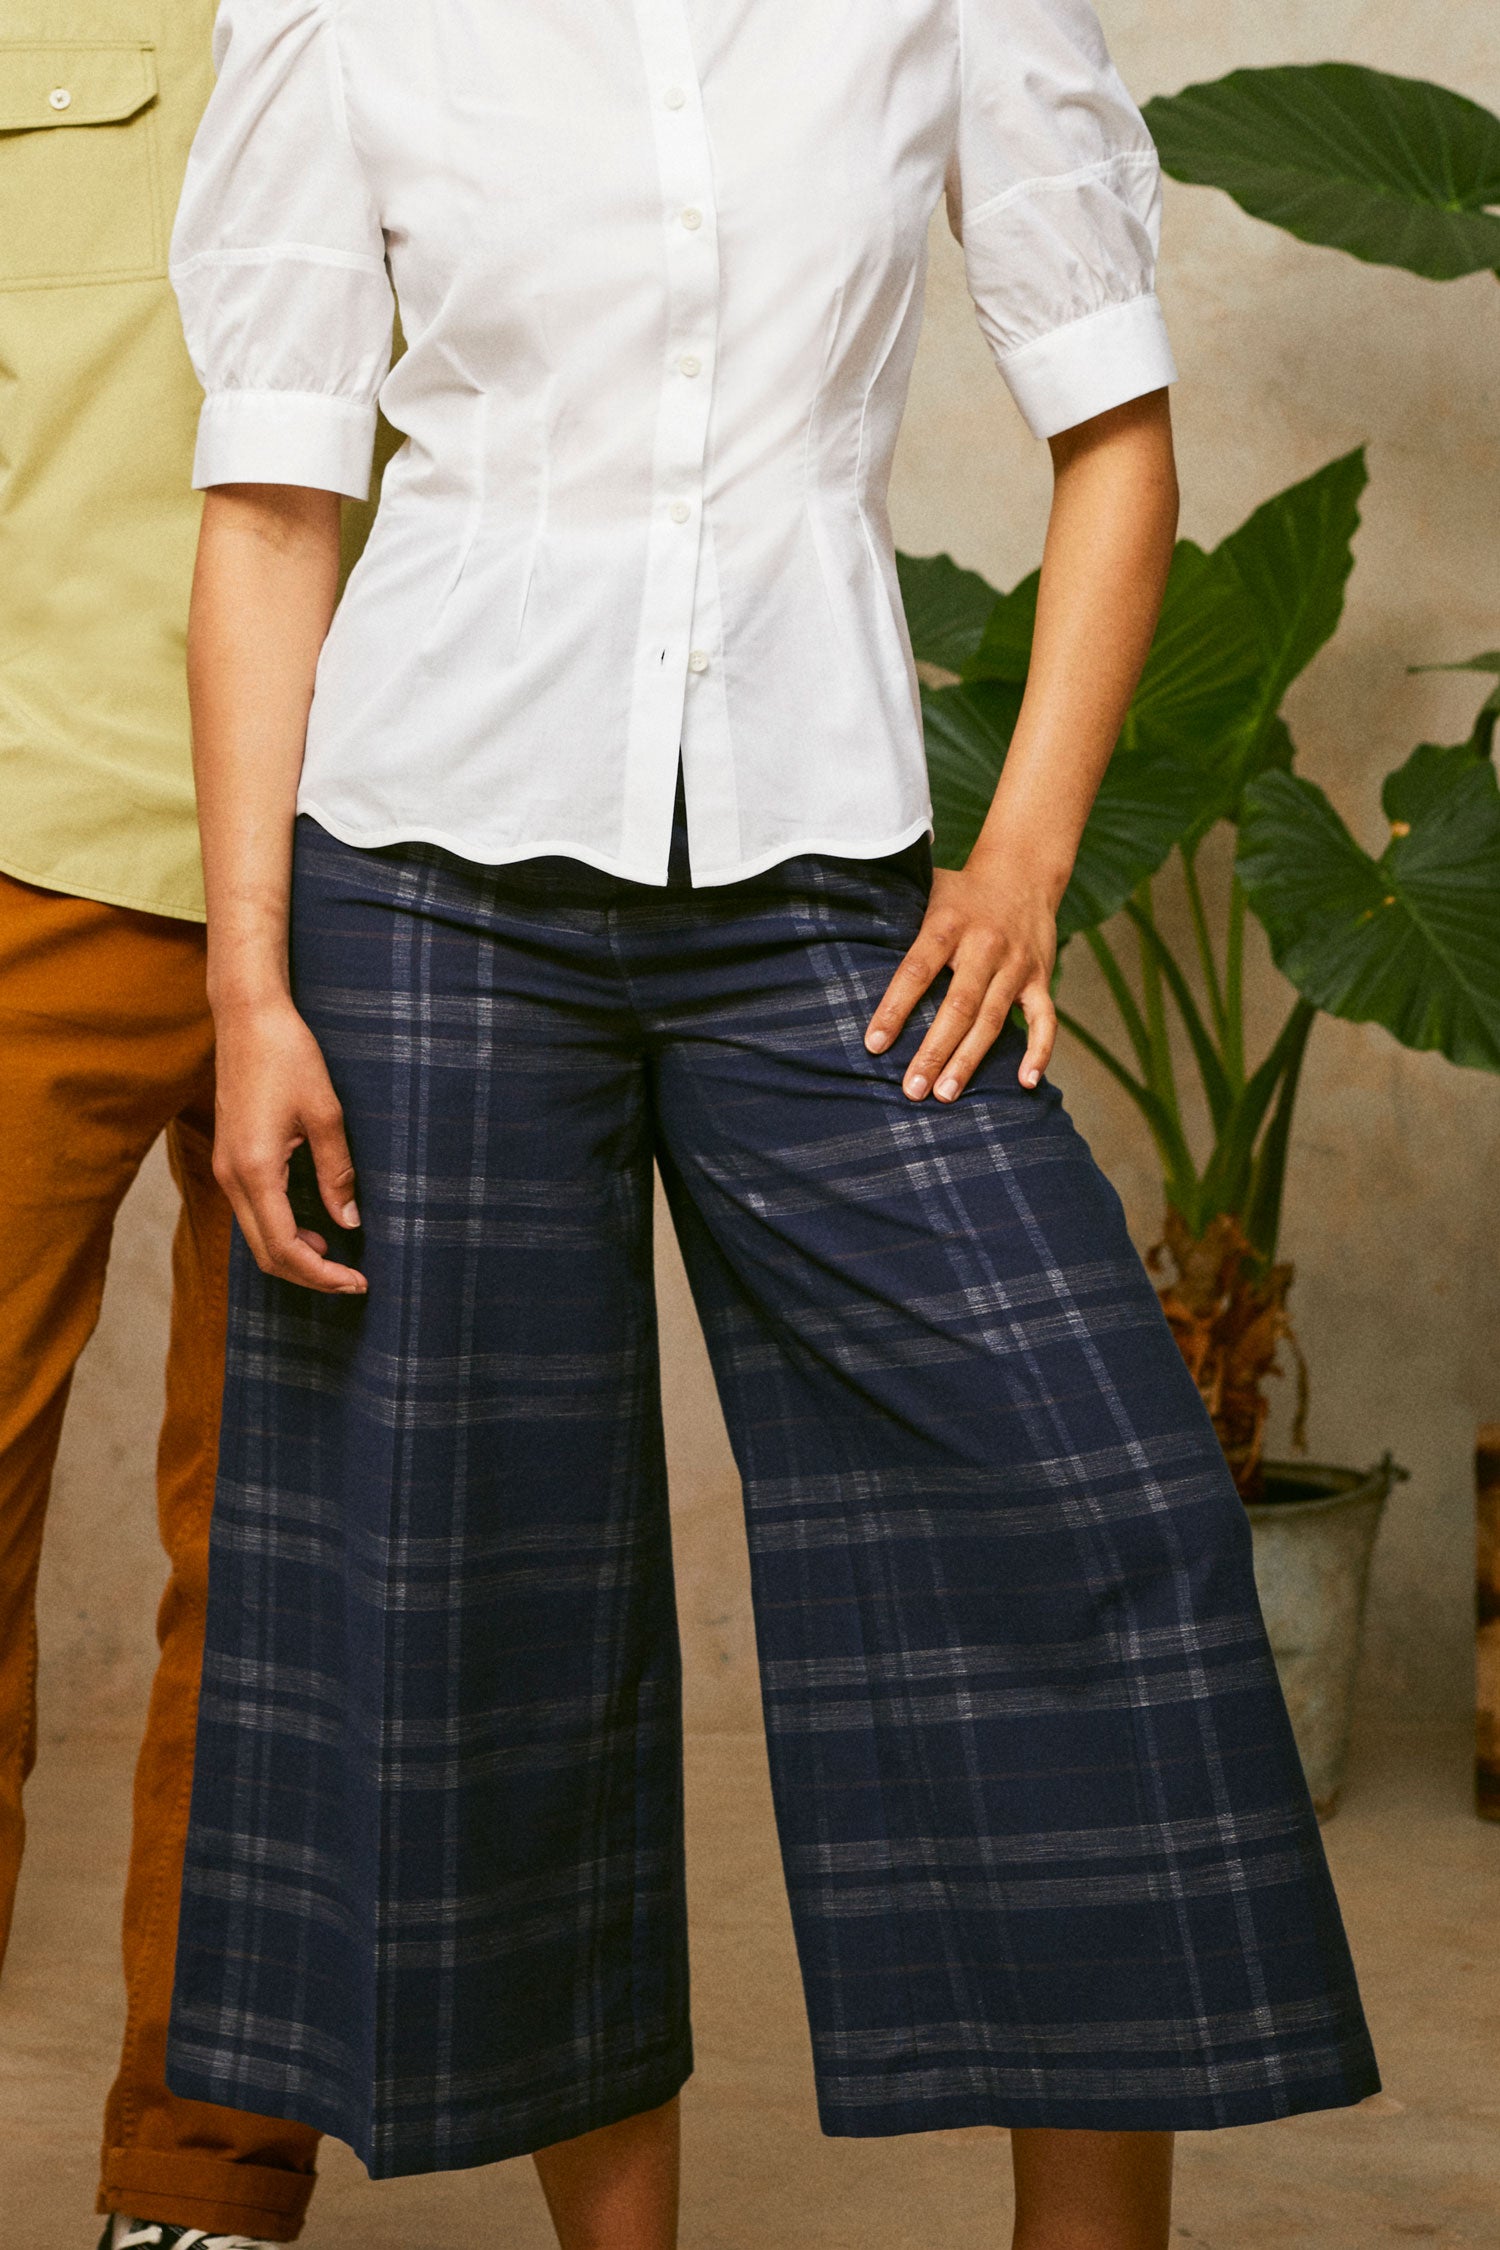 Close up of model wearing Saywood's Amelia check trousers, wide leg culotte shape in navy check, with black sandals. Worn with the white puff sleeve shirt, Joni blouse. A plant and another model can be seen in the background.